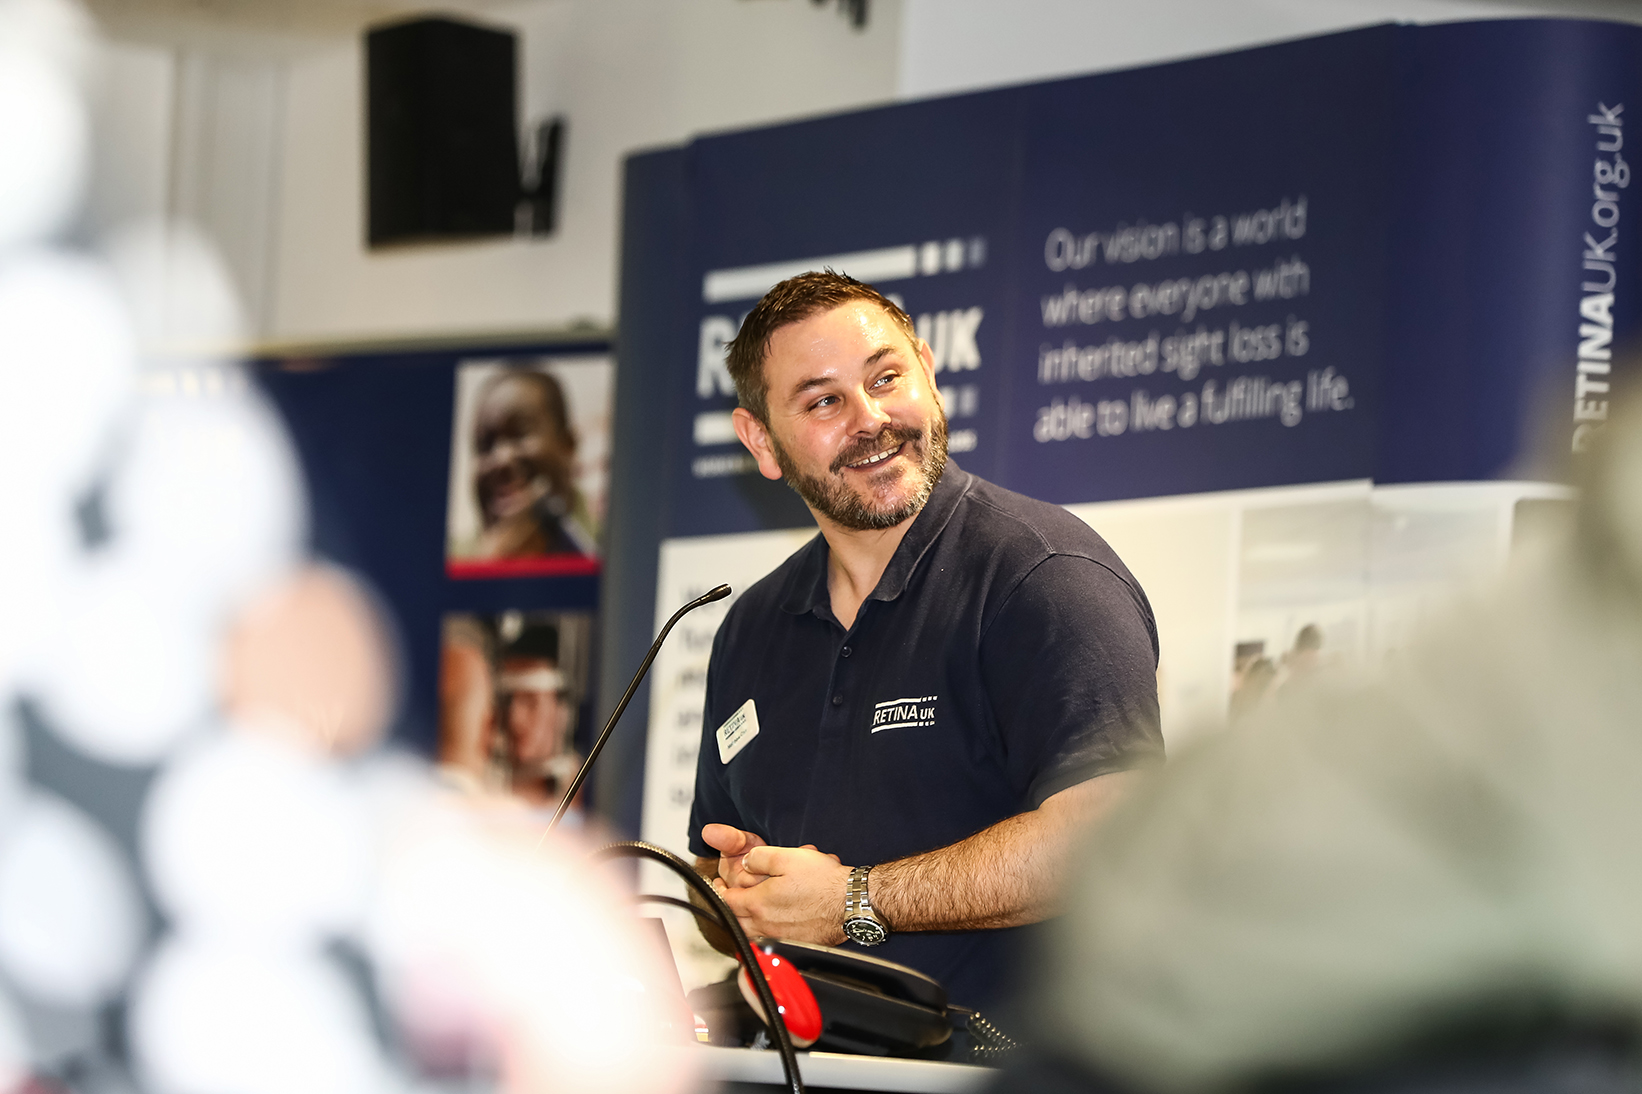 Matthew Carr, Strategic Lead – Campaigning, Influencing and Policy at Retina UK. He is speaking at an event standing in front of a small microphone. He looks over the side and smile. Behind you can see Retina UK boards and information, he also wears a navy blue Retina UK polo shirt.